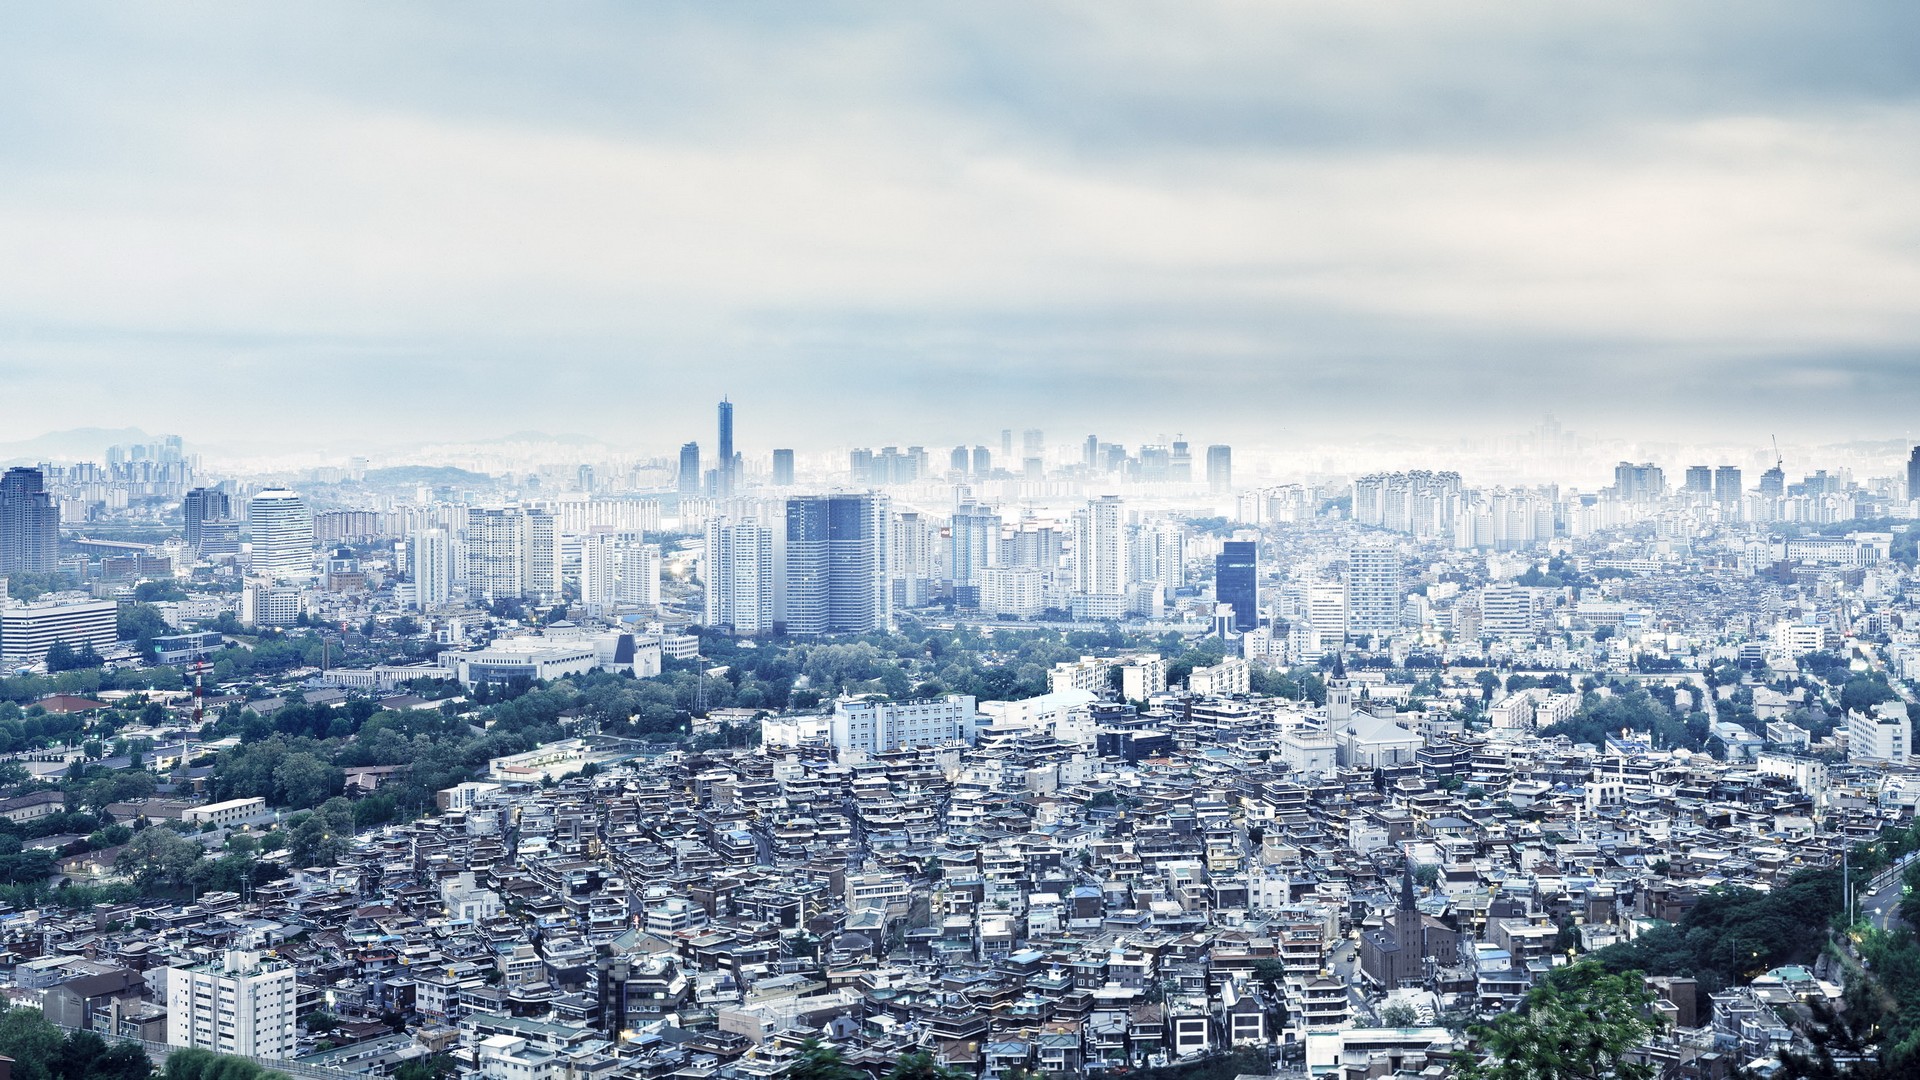 cityscapes, Skylines, Buildings, Skyscrapers, Asians, Asia, Asian, Architecture, Seoul, City, Skyline, South, Korea, Citylife Wallpaper